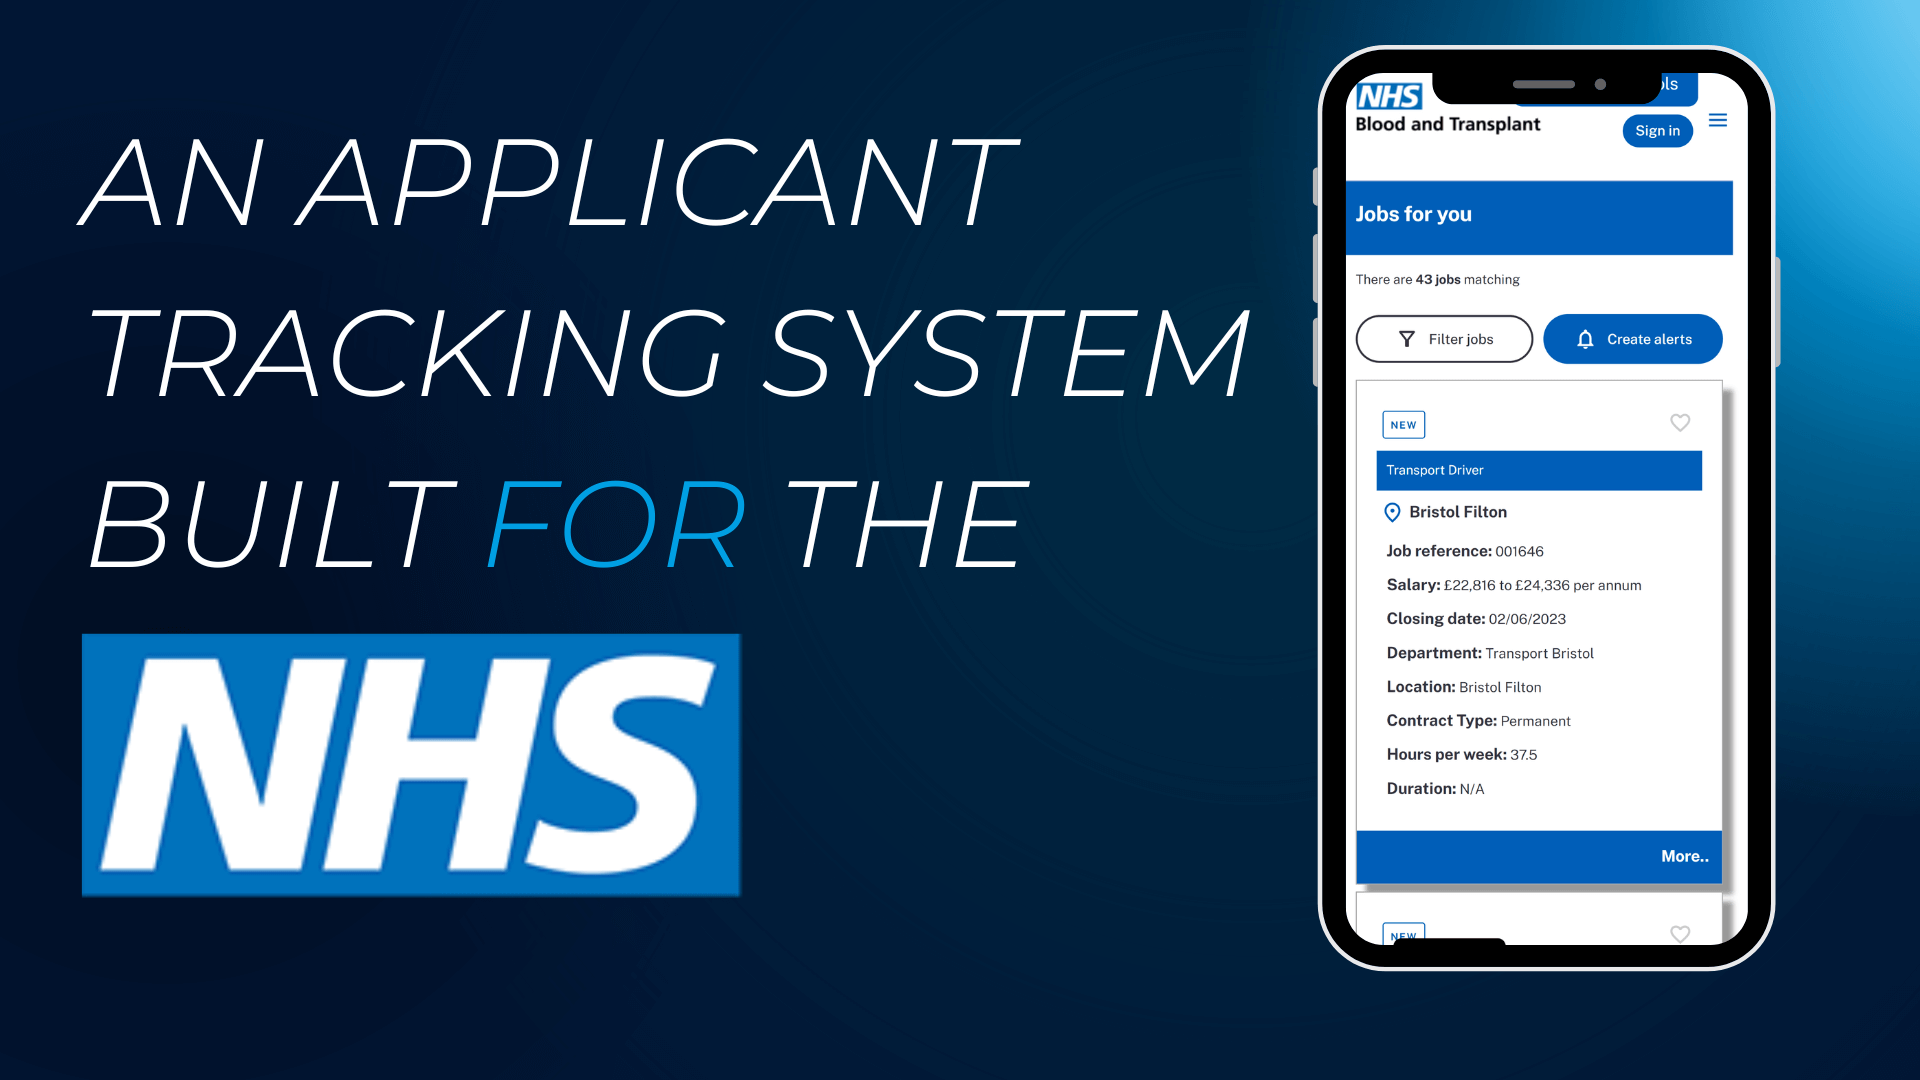 An applicant tracking system built for the NHS - Jobtrain